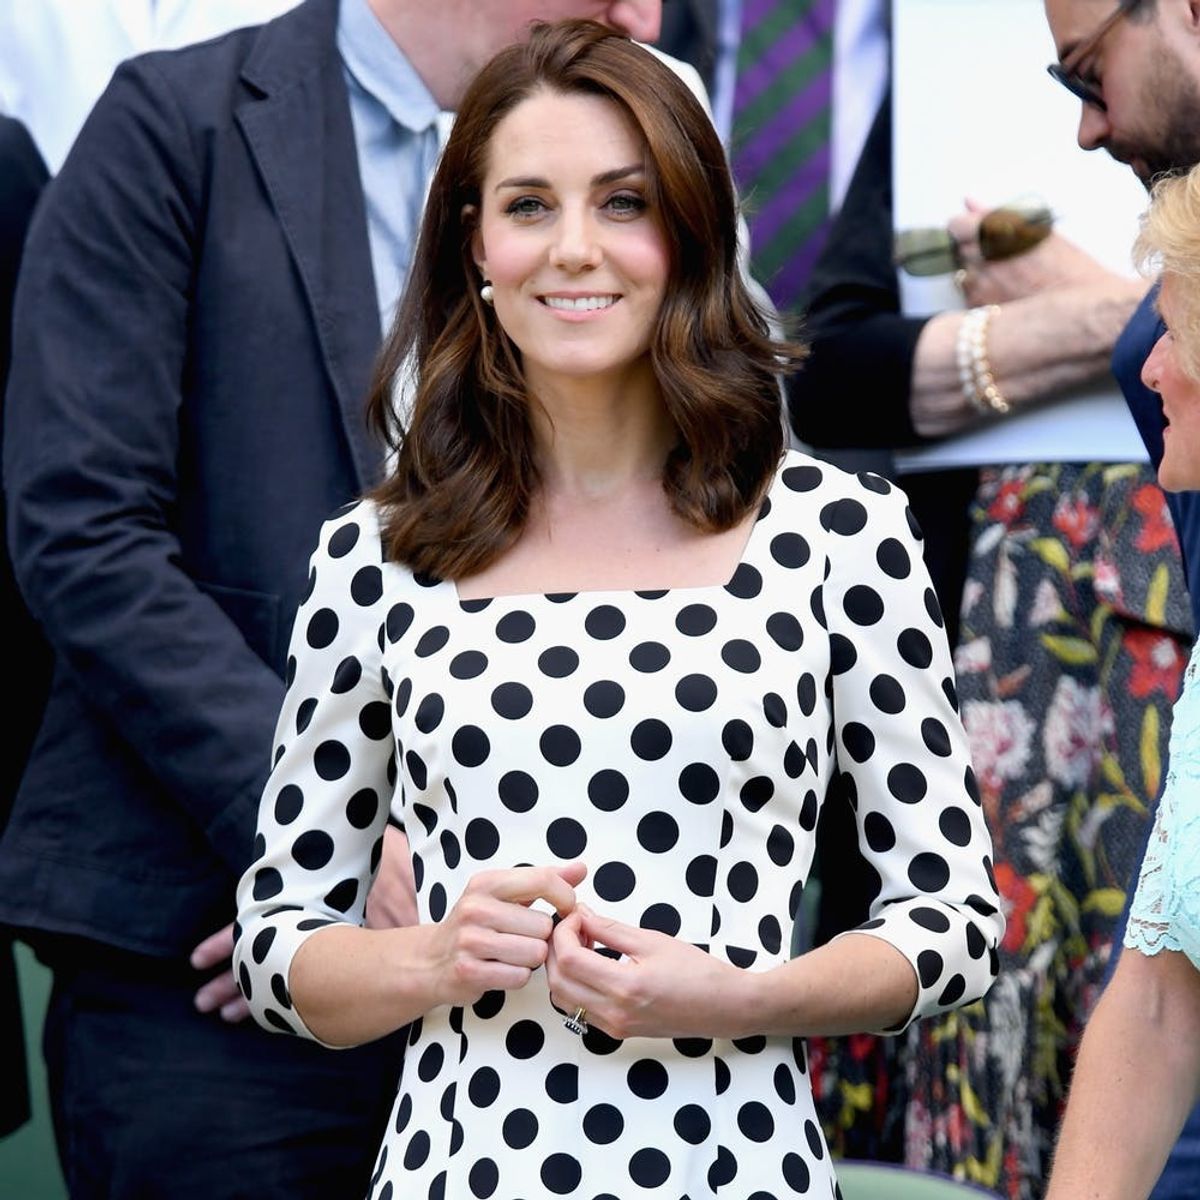 9 Spring Fashion Buys Inspired by Kate Middleton’s Love of Polka Dots